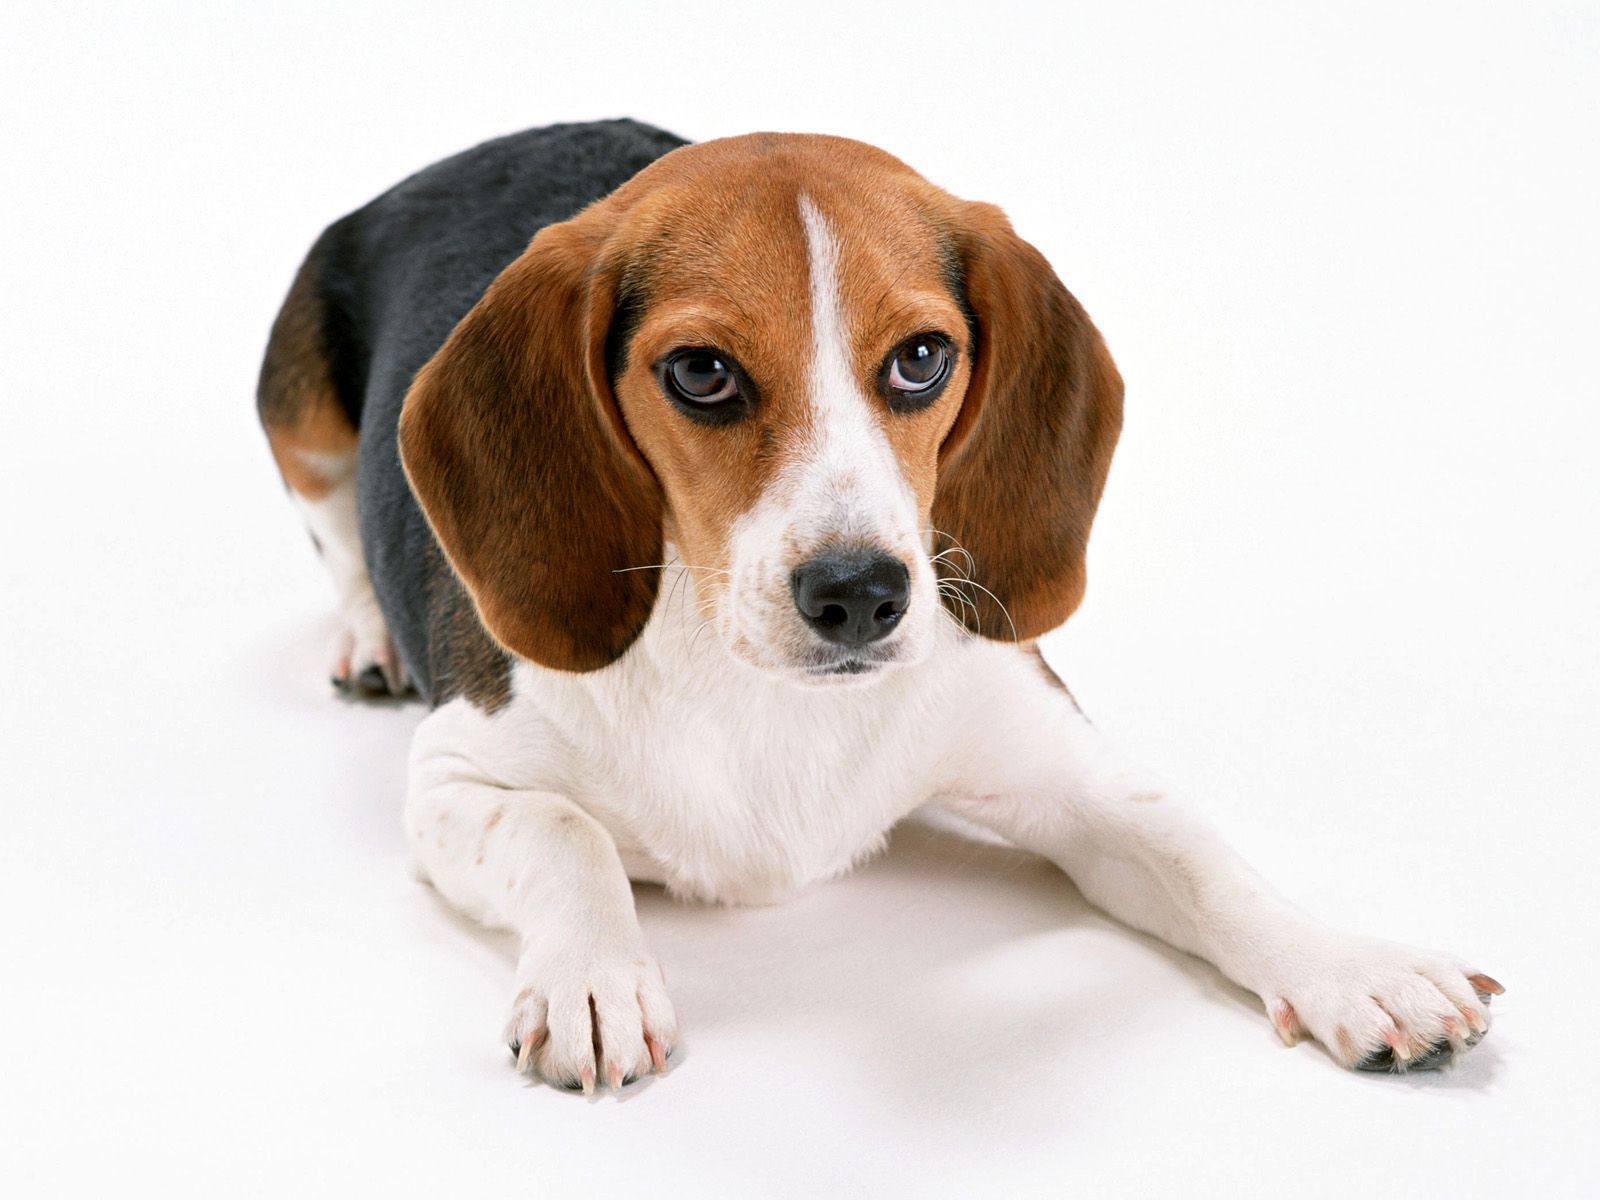 Get where to find beagle puppies for sale in illinois